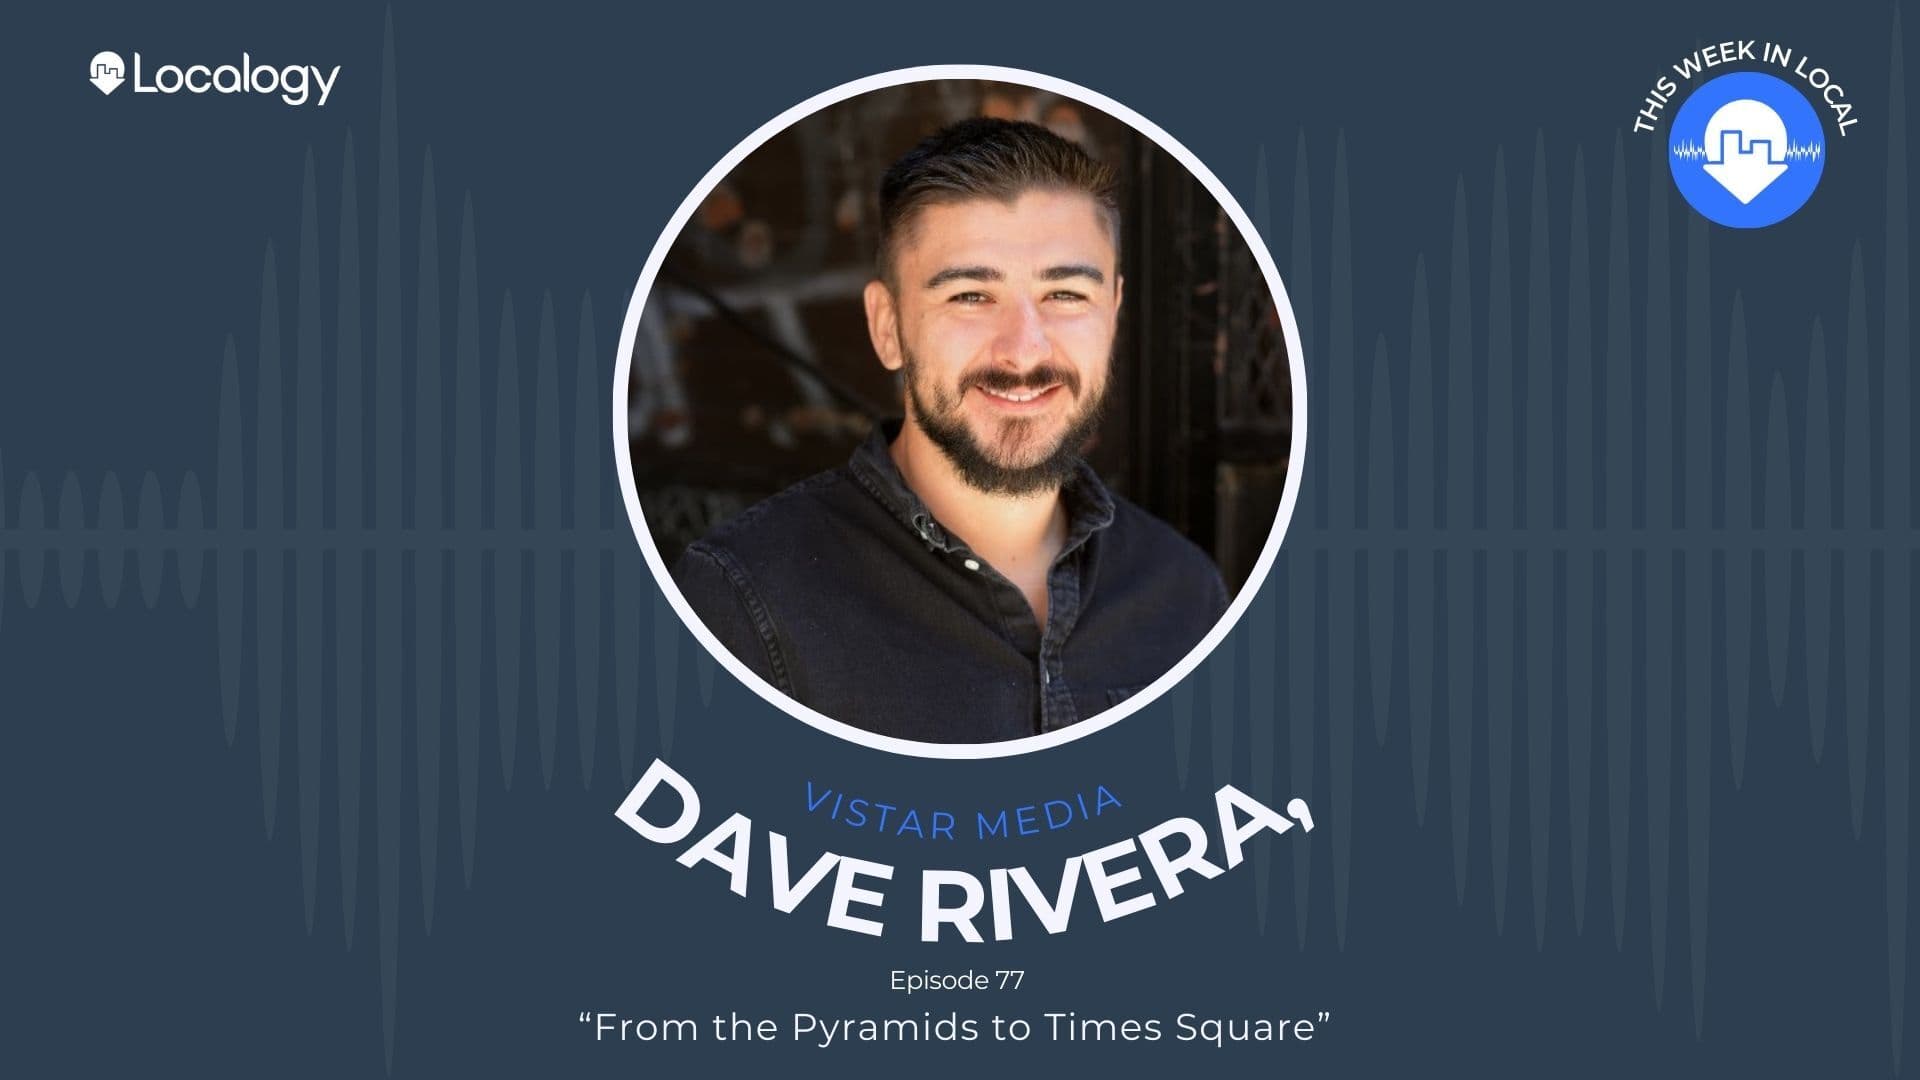 From the Pyramids to Times Square -- DOOH with Vistar Media's Dave Rivera Localogy